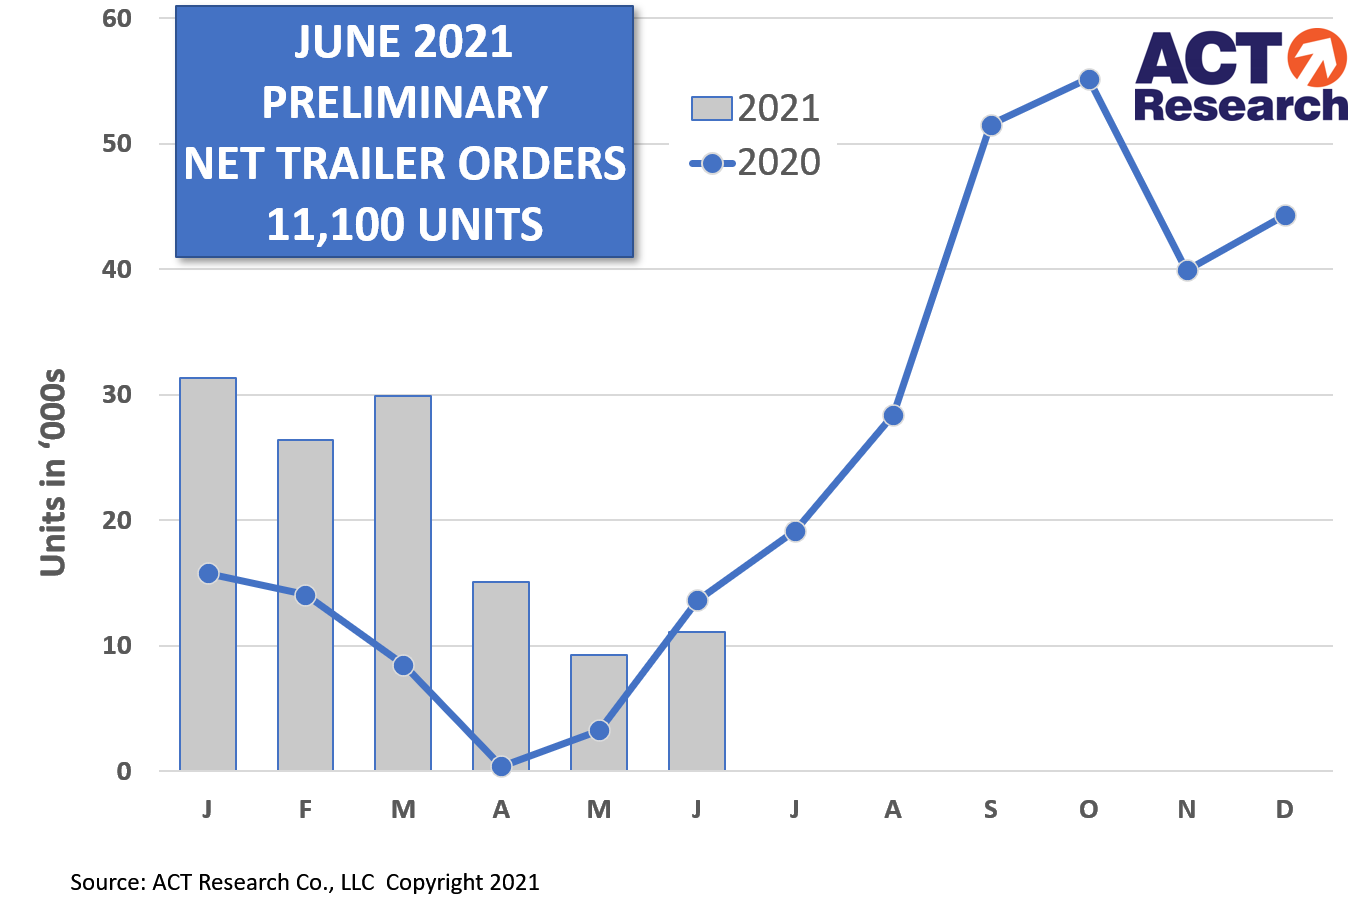 Calm before the storm: Muted June trailer orders conceal coming boom